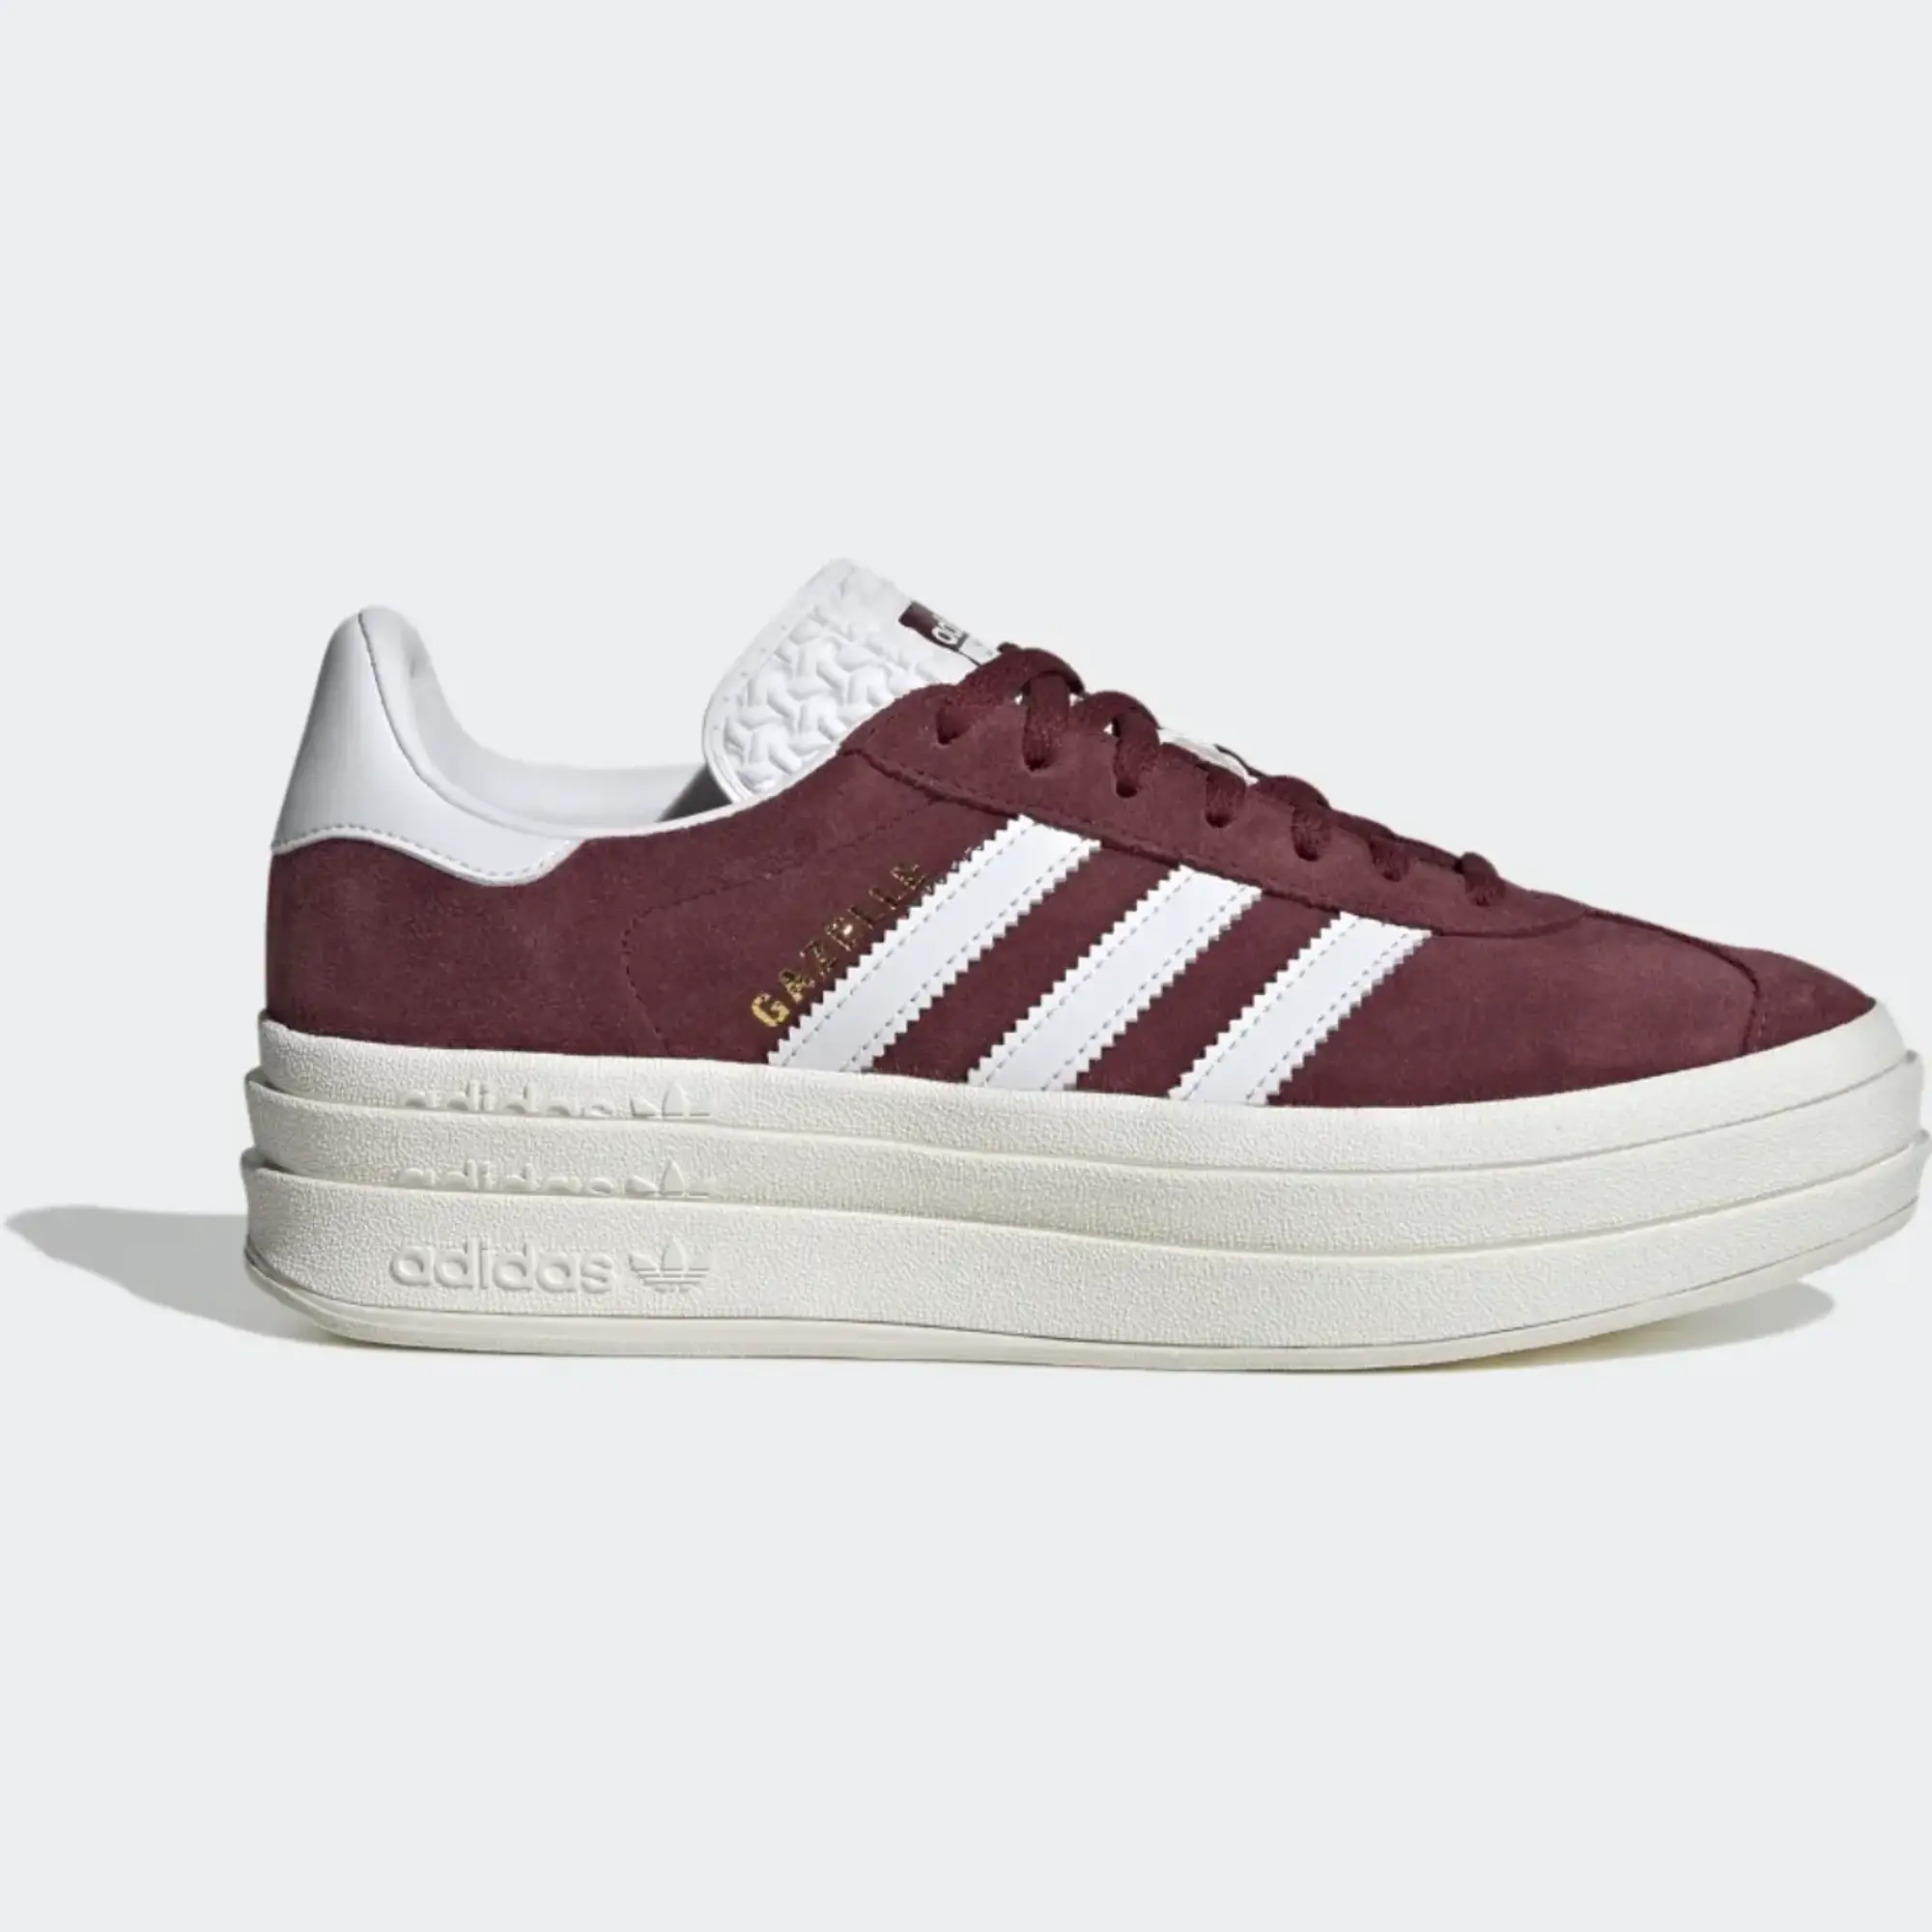 Adidas Originals Gazelle Bold Trainers In Red And White